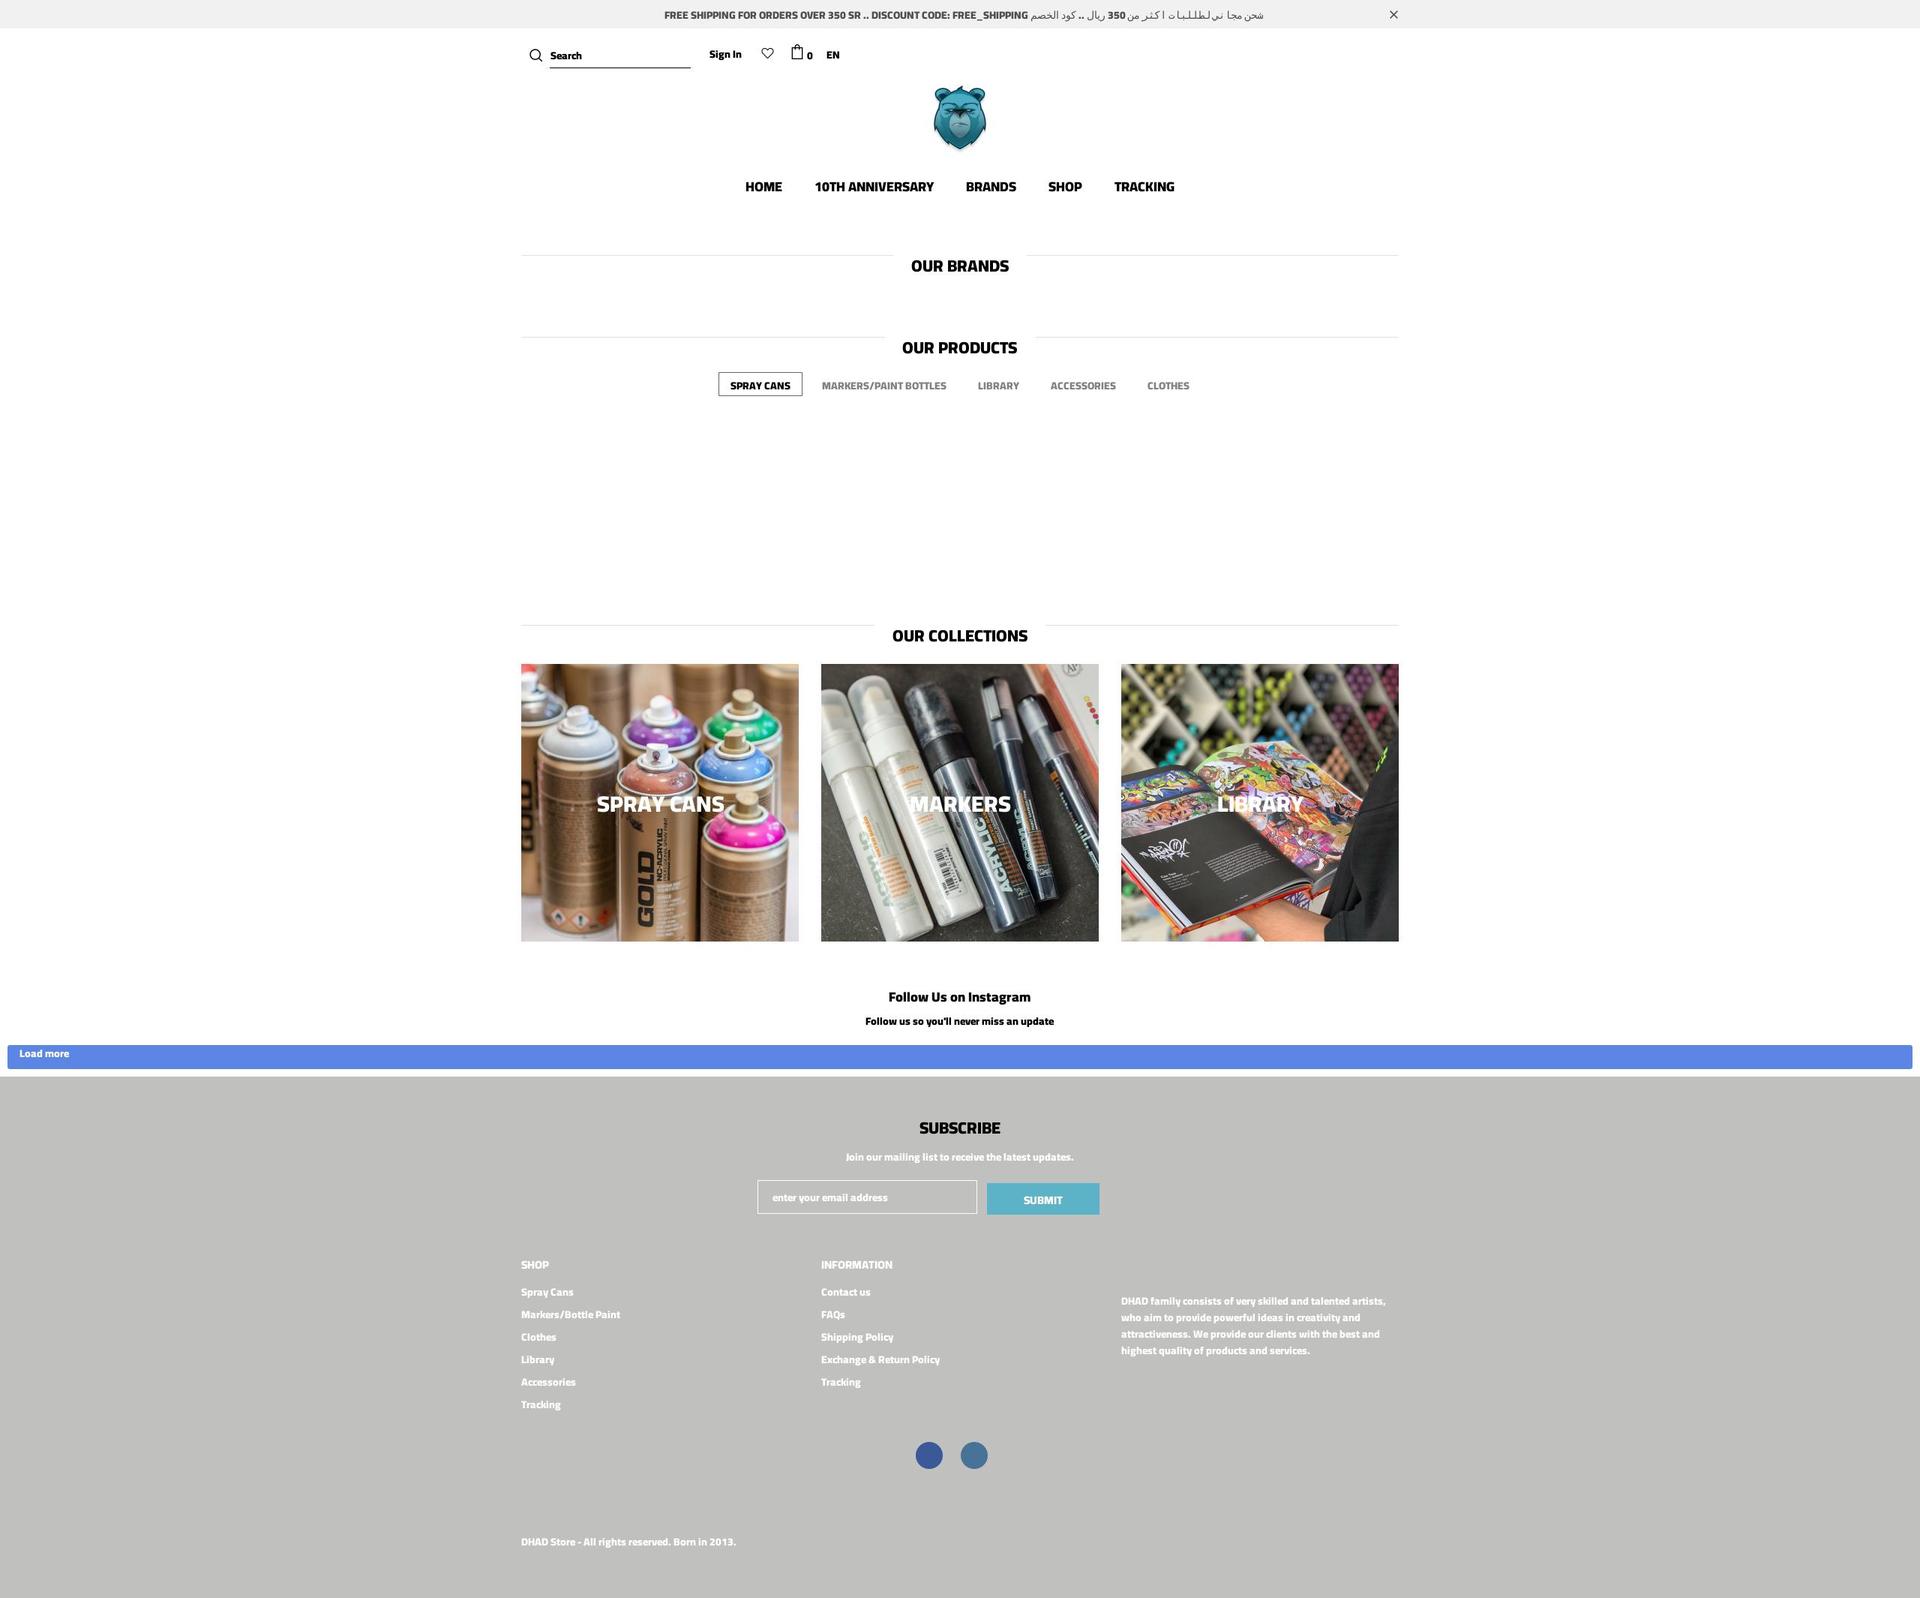 V Shopify theme site example dhadstore.com